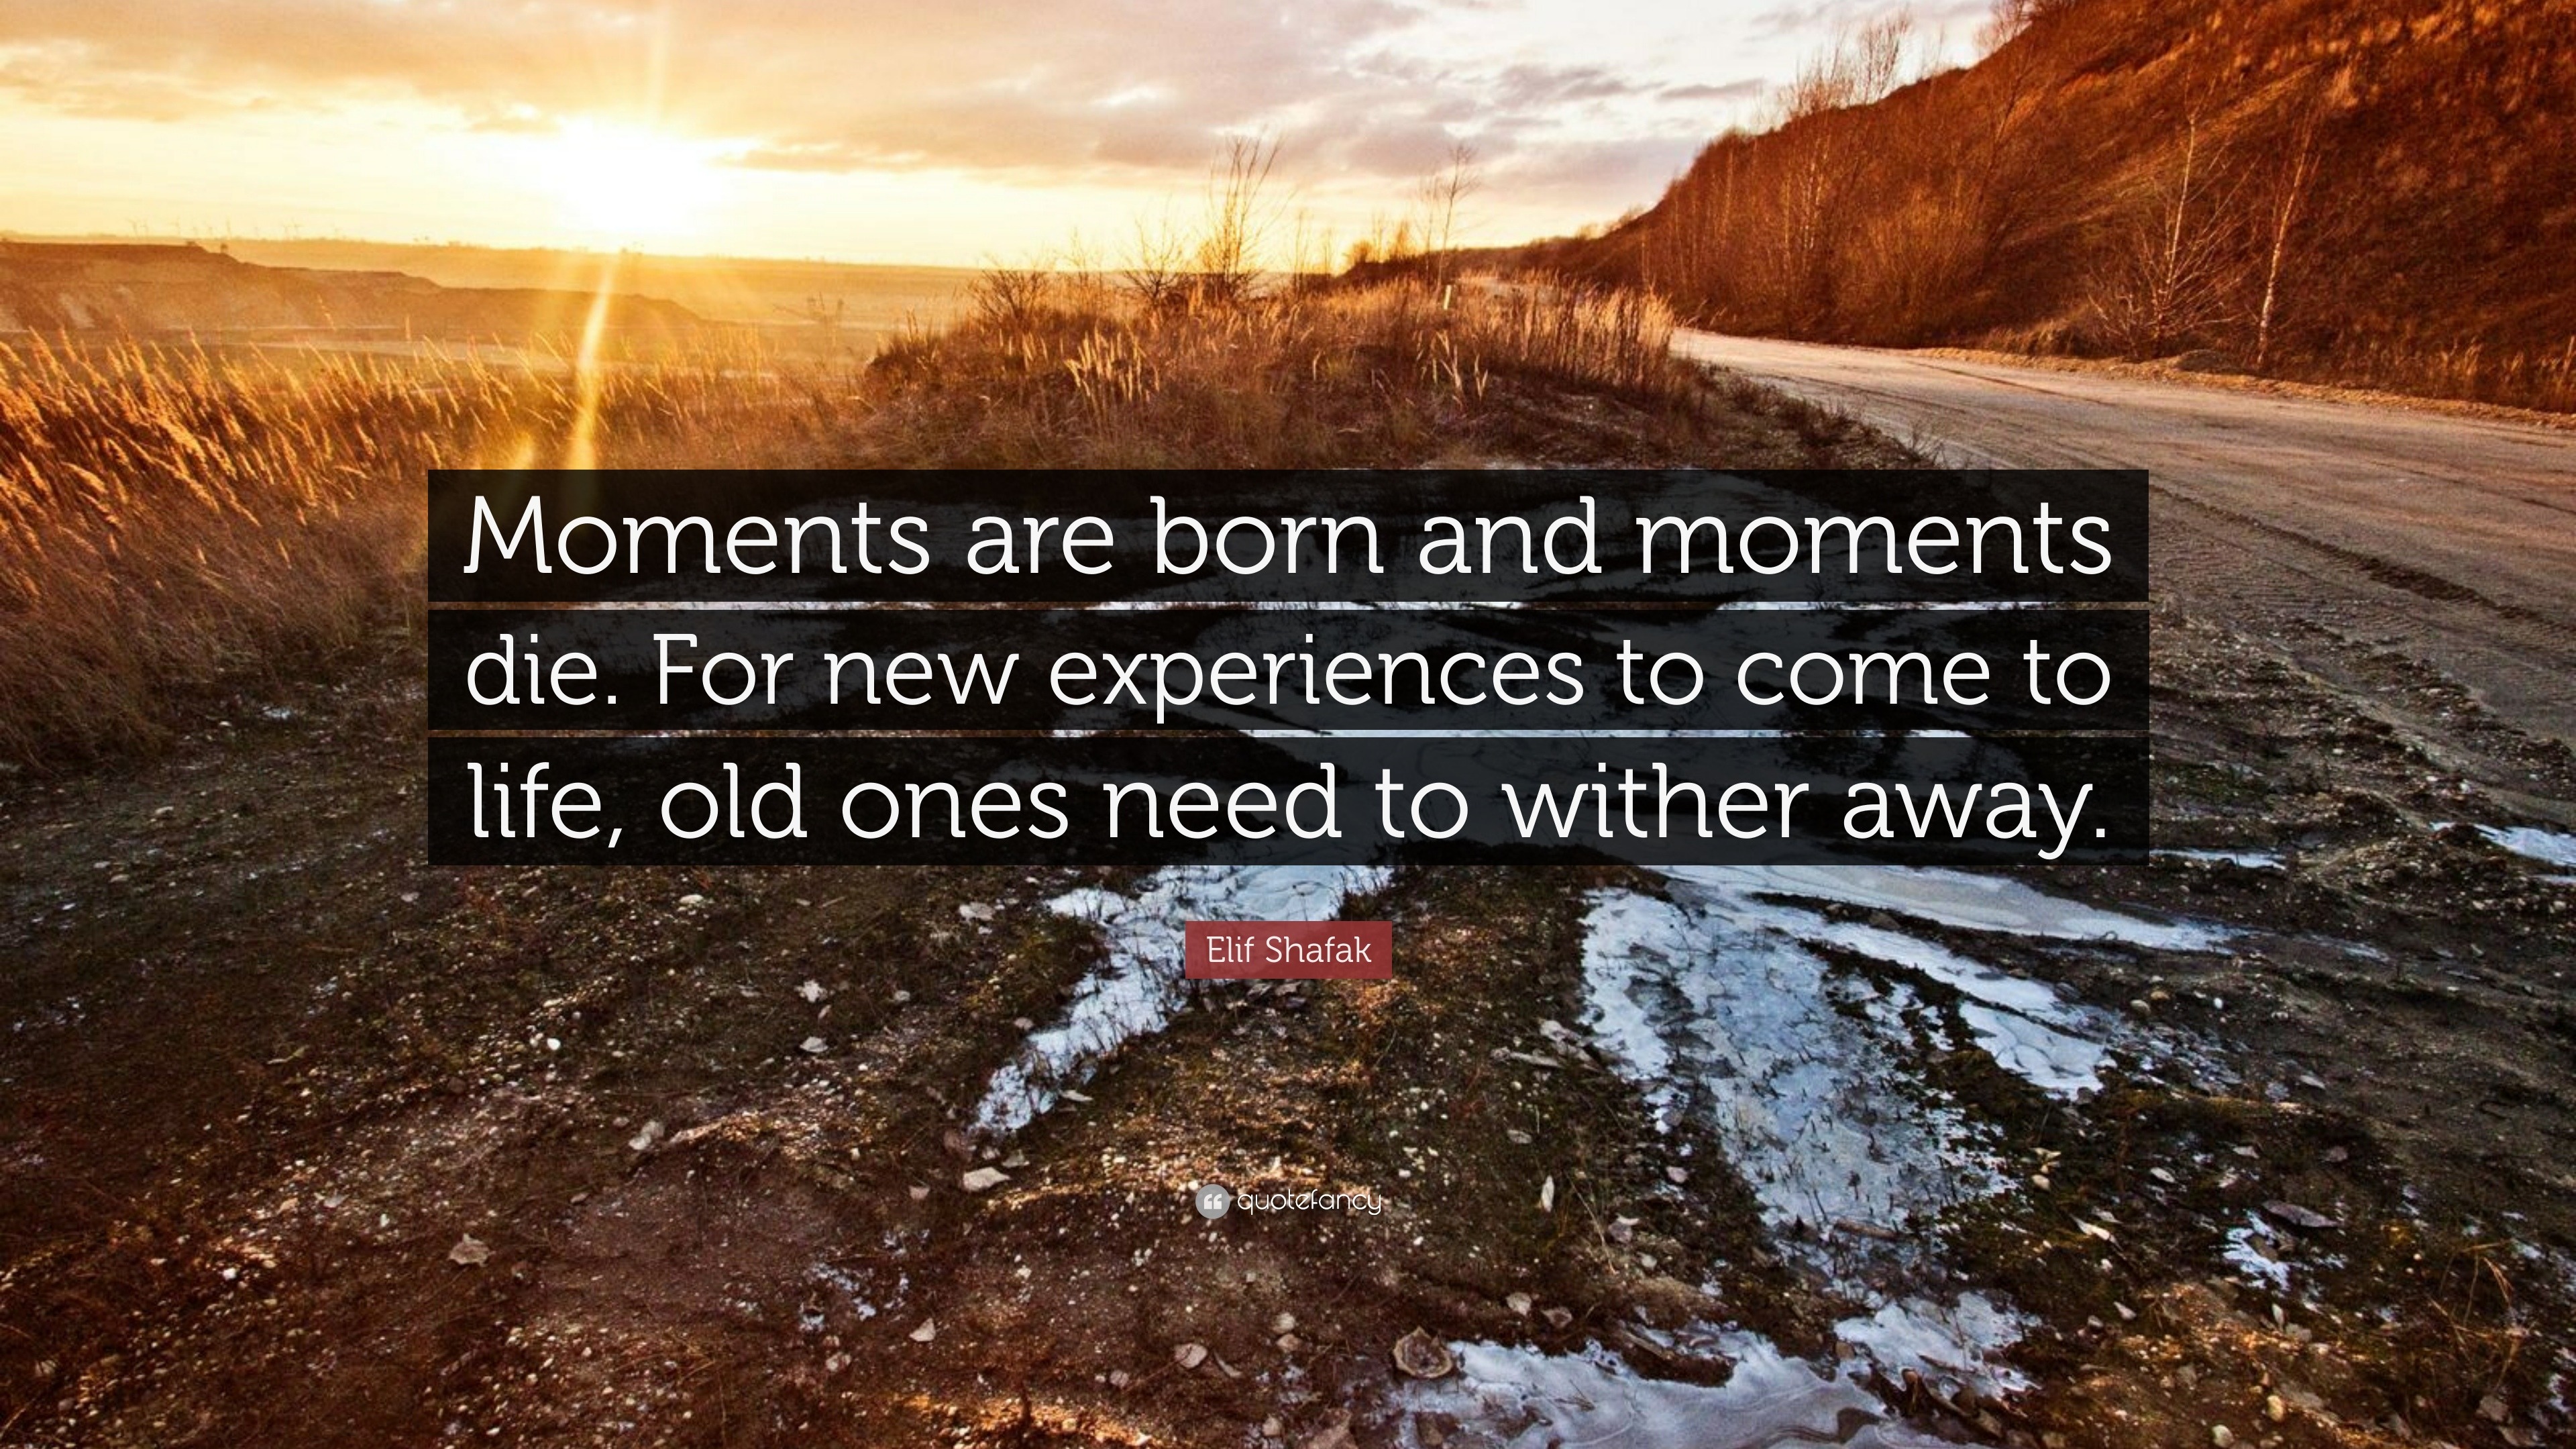 Elif Shafak Quote “Moments are born and moments For new experiences to